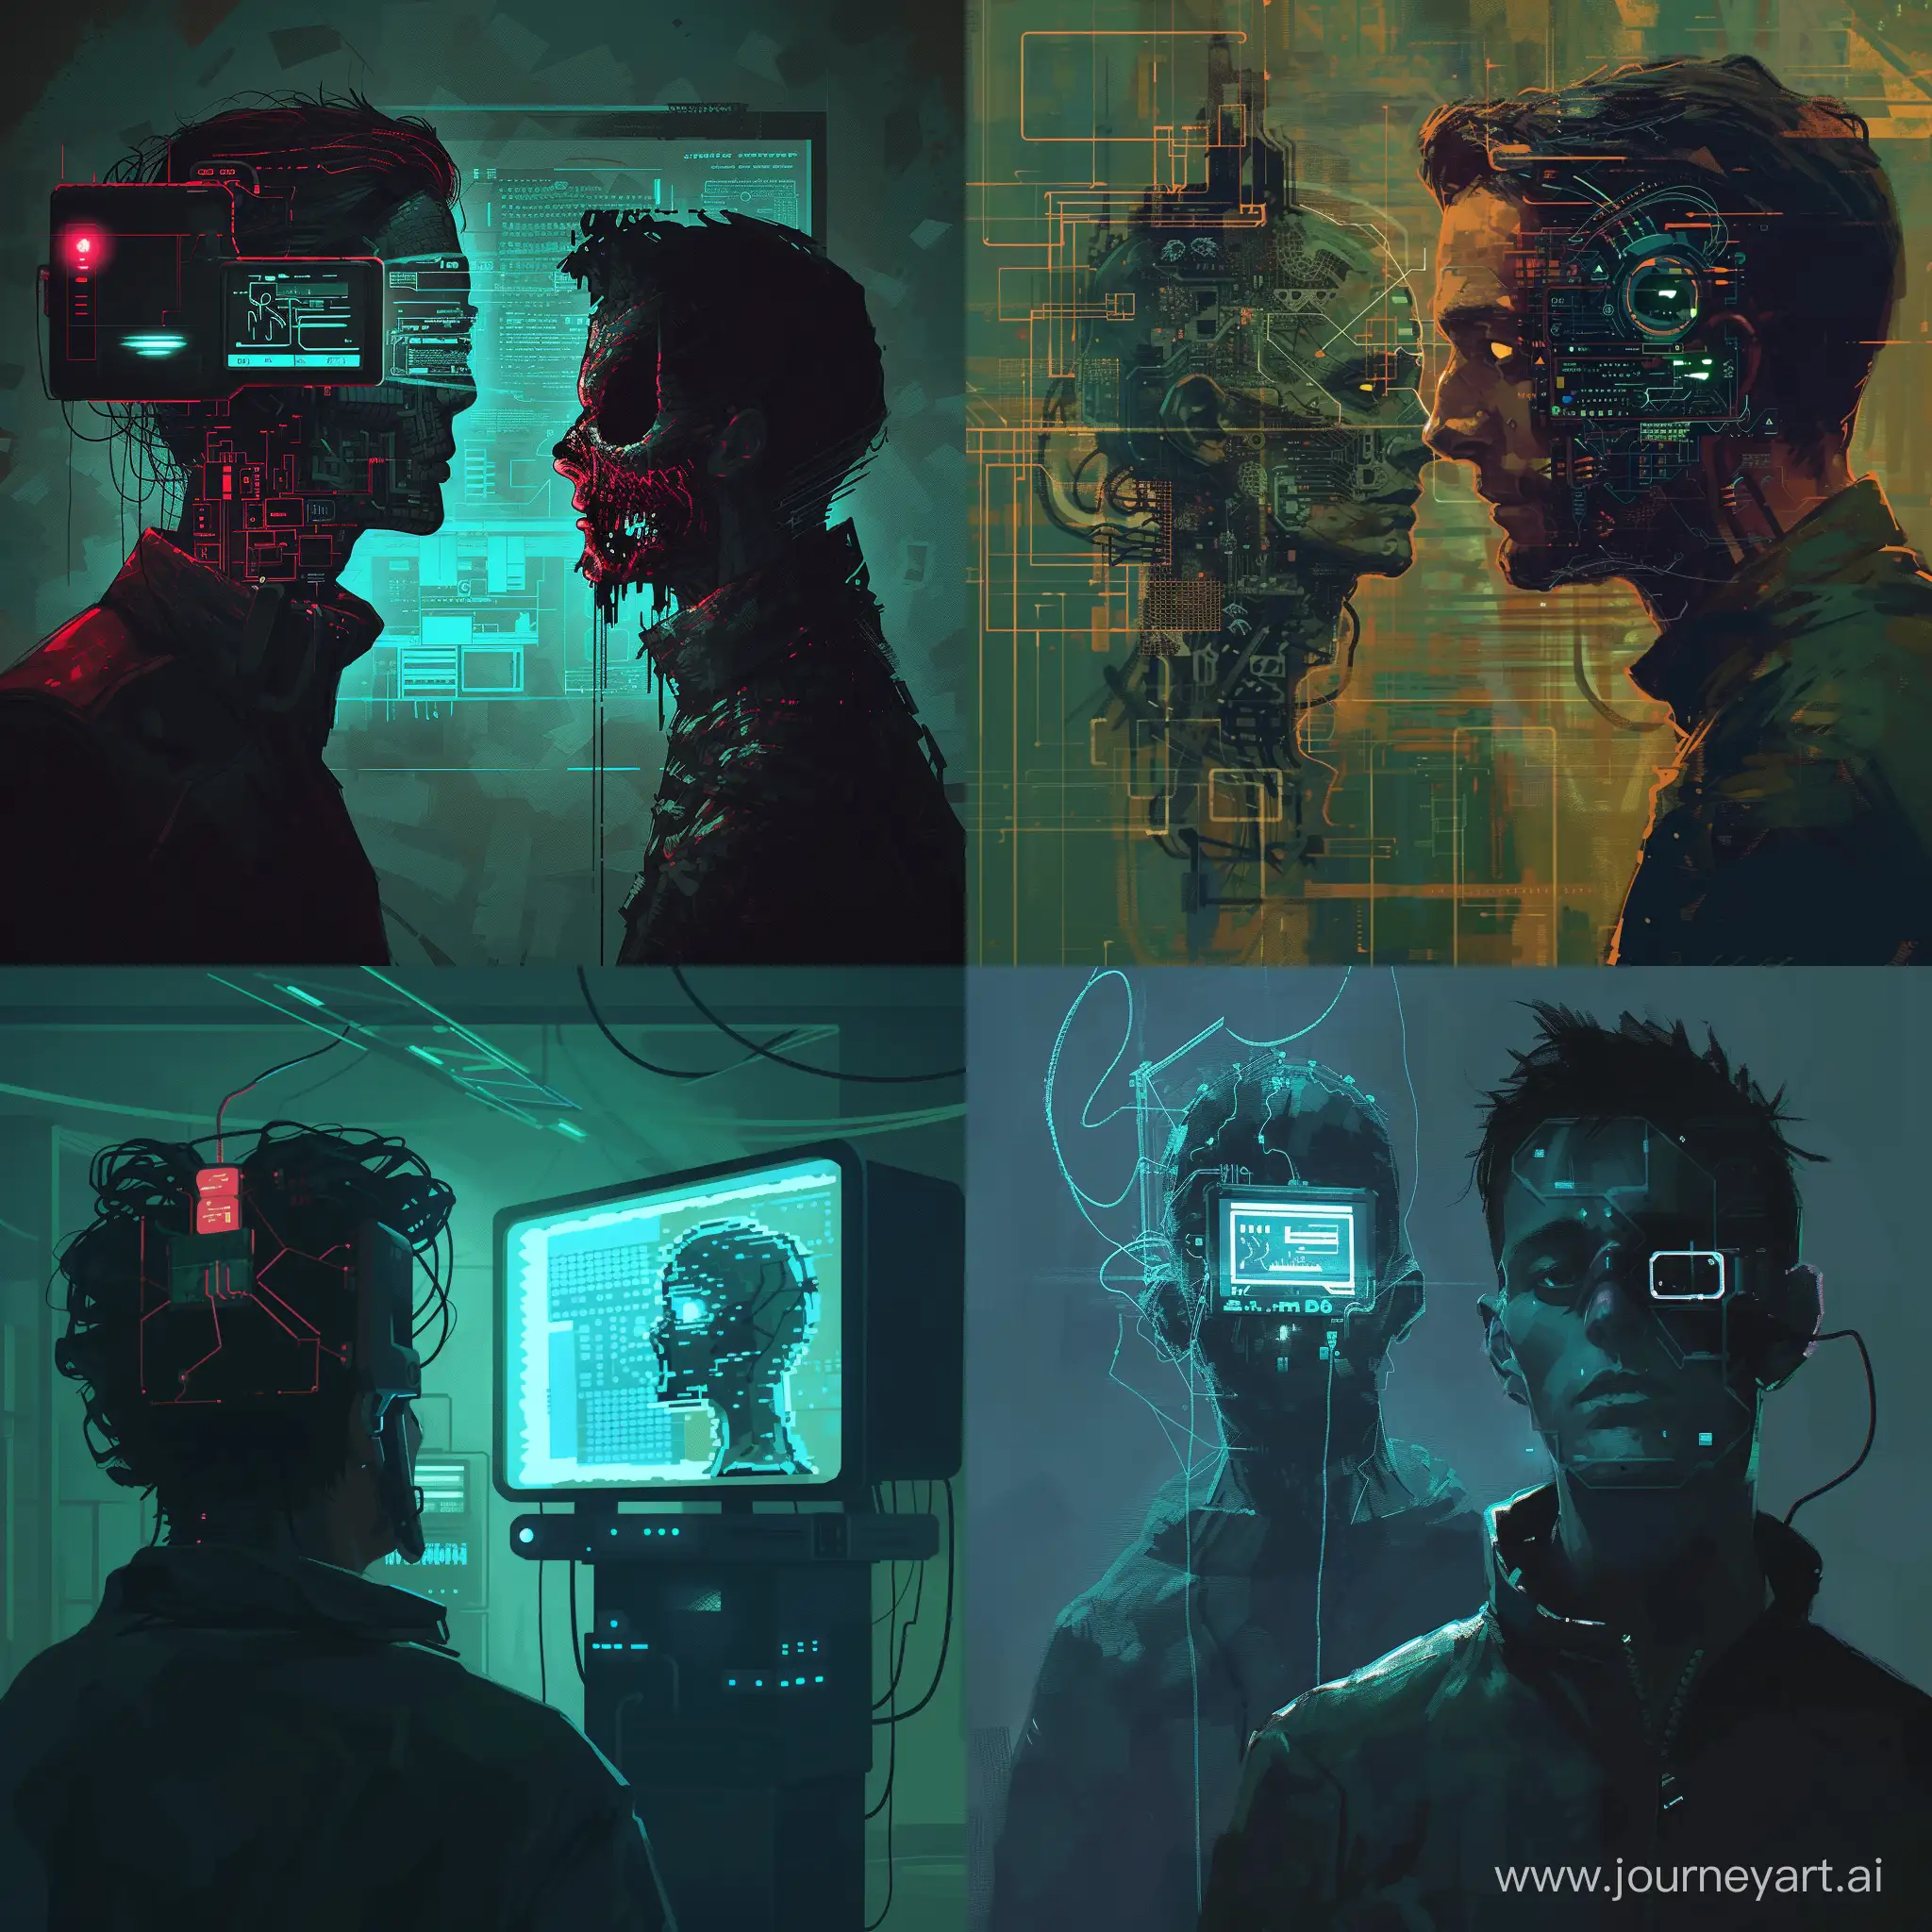 Digital-Space-Encounter-Main-Character-Confronting-Distorted-Computer-Entity